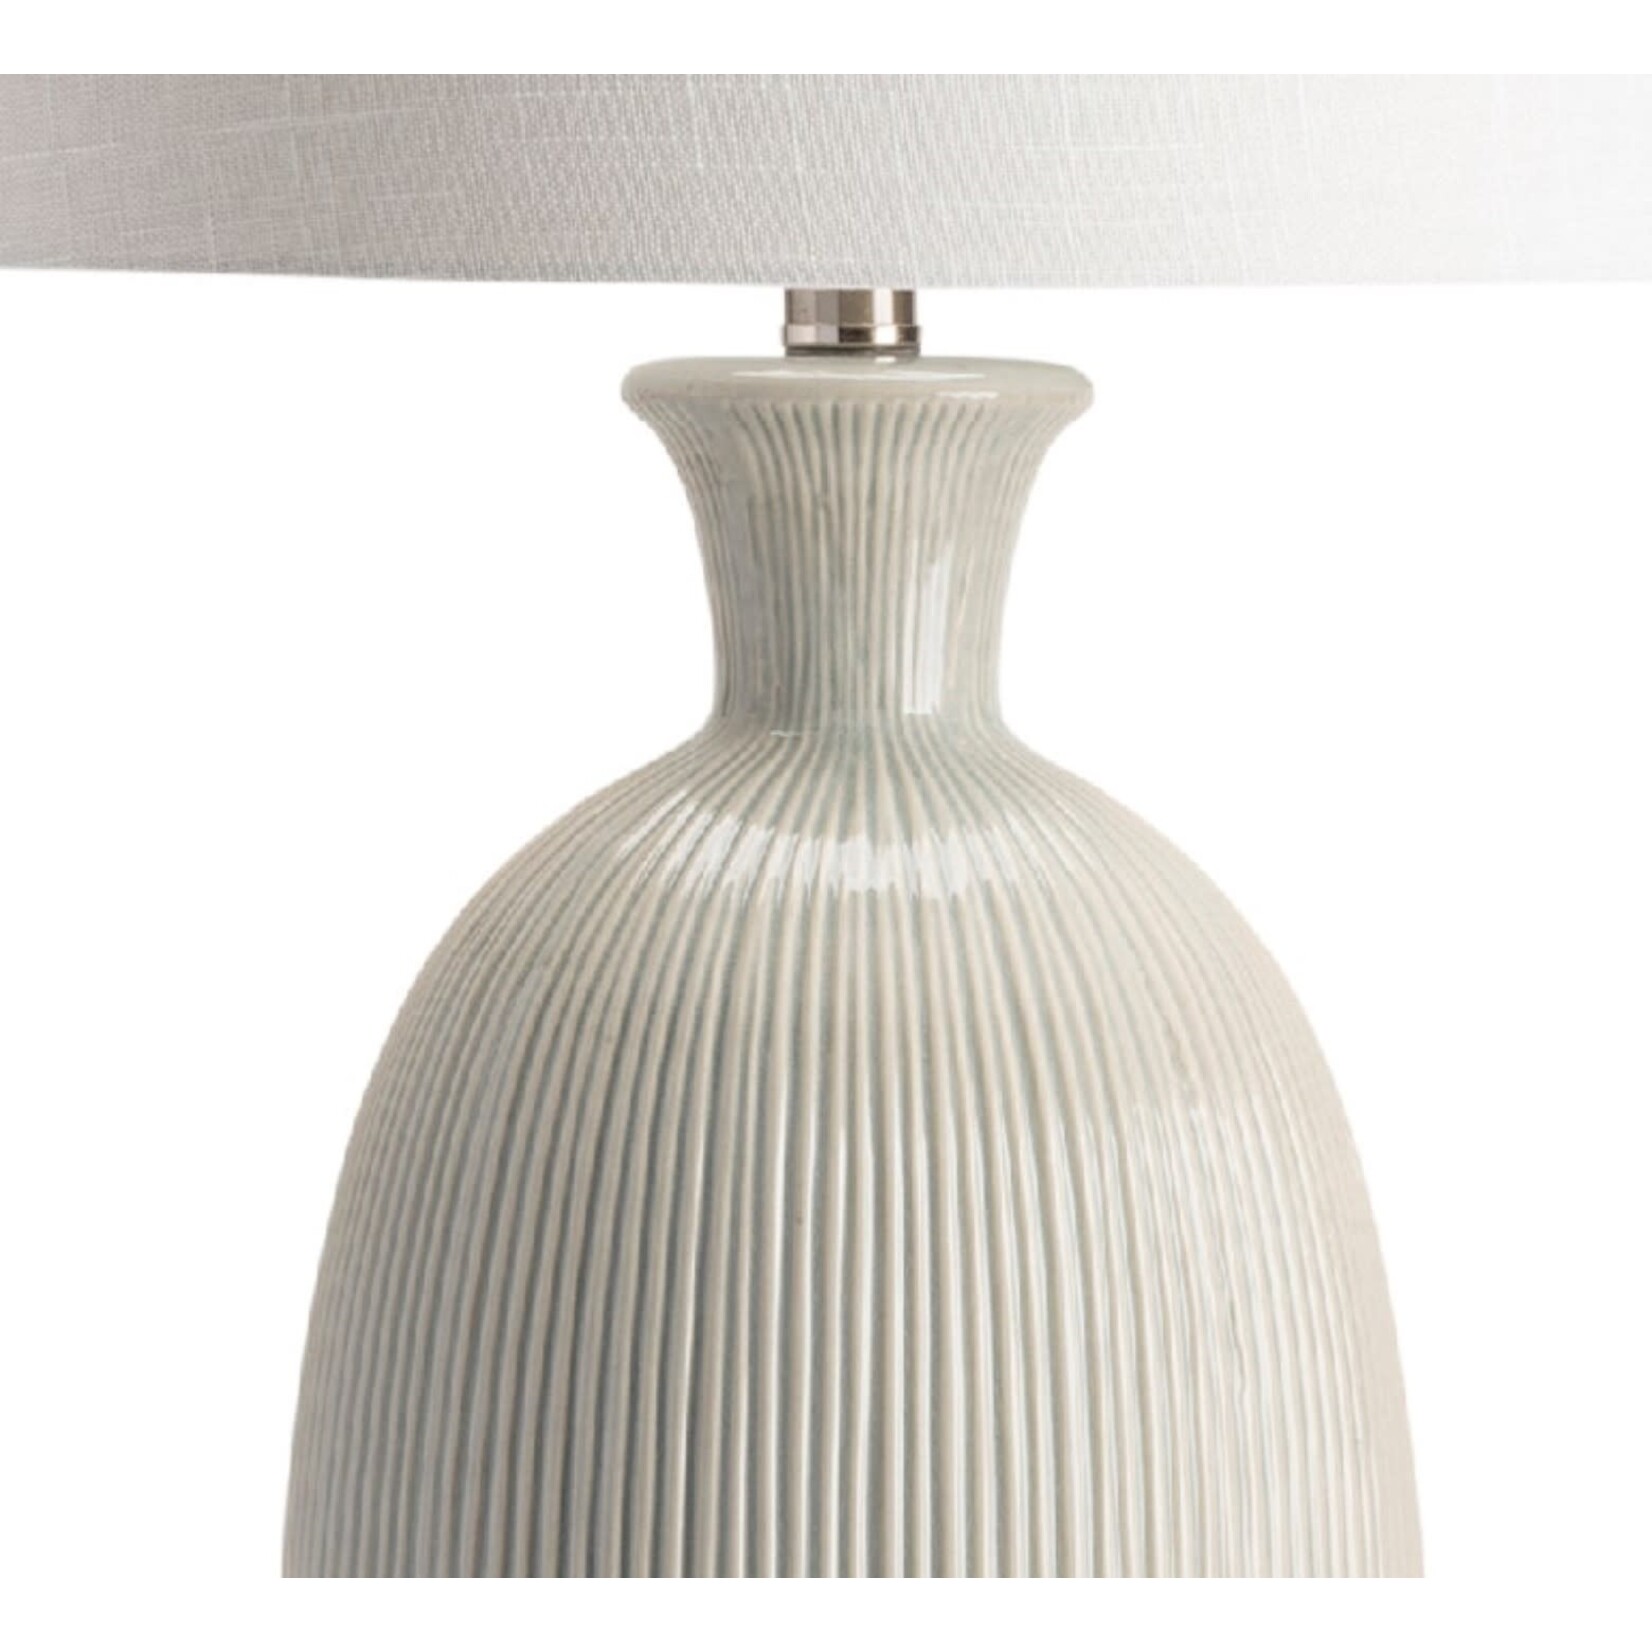 Mickler & Co. Carrie Table Lamp